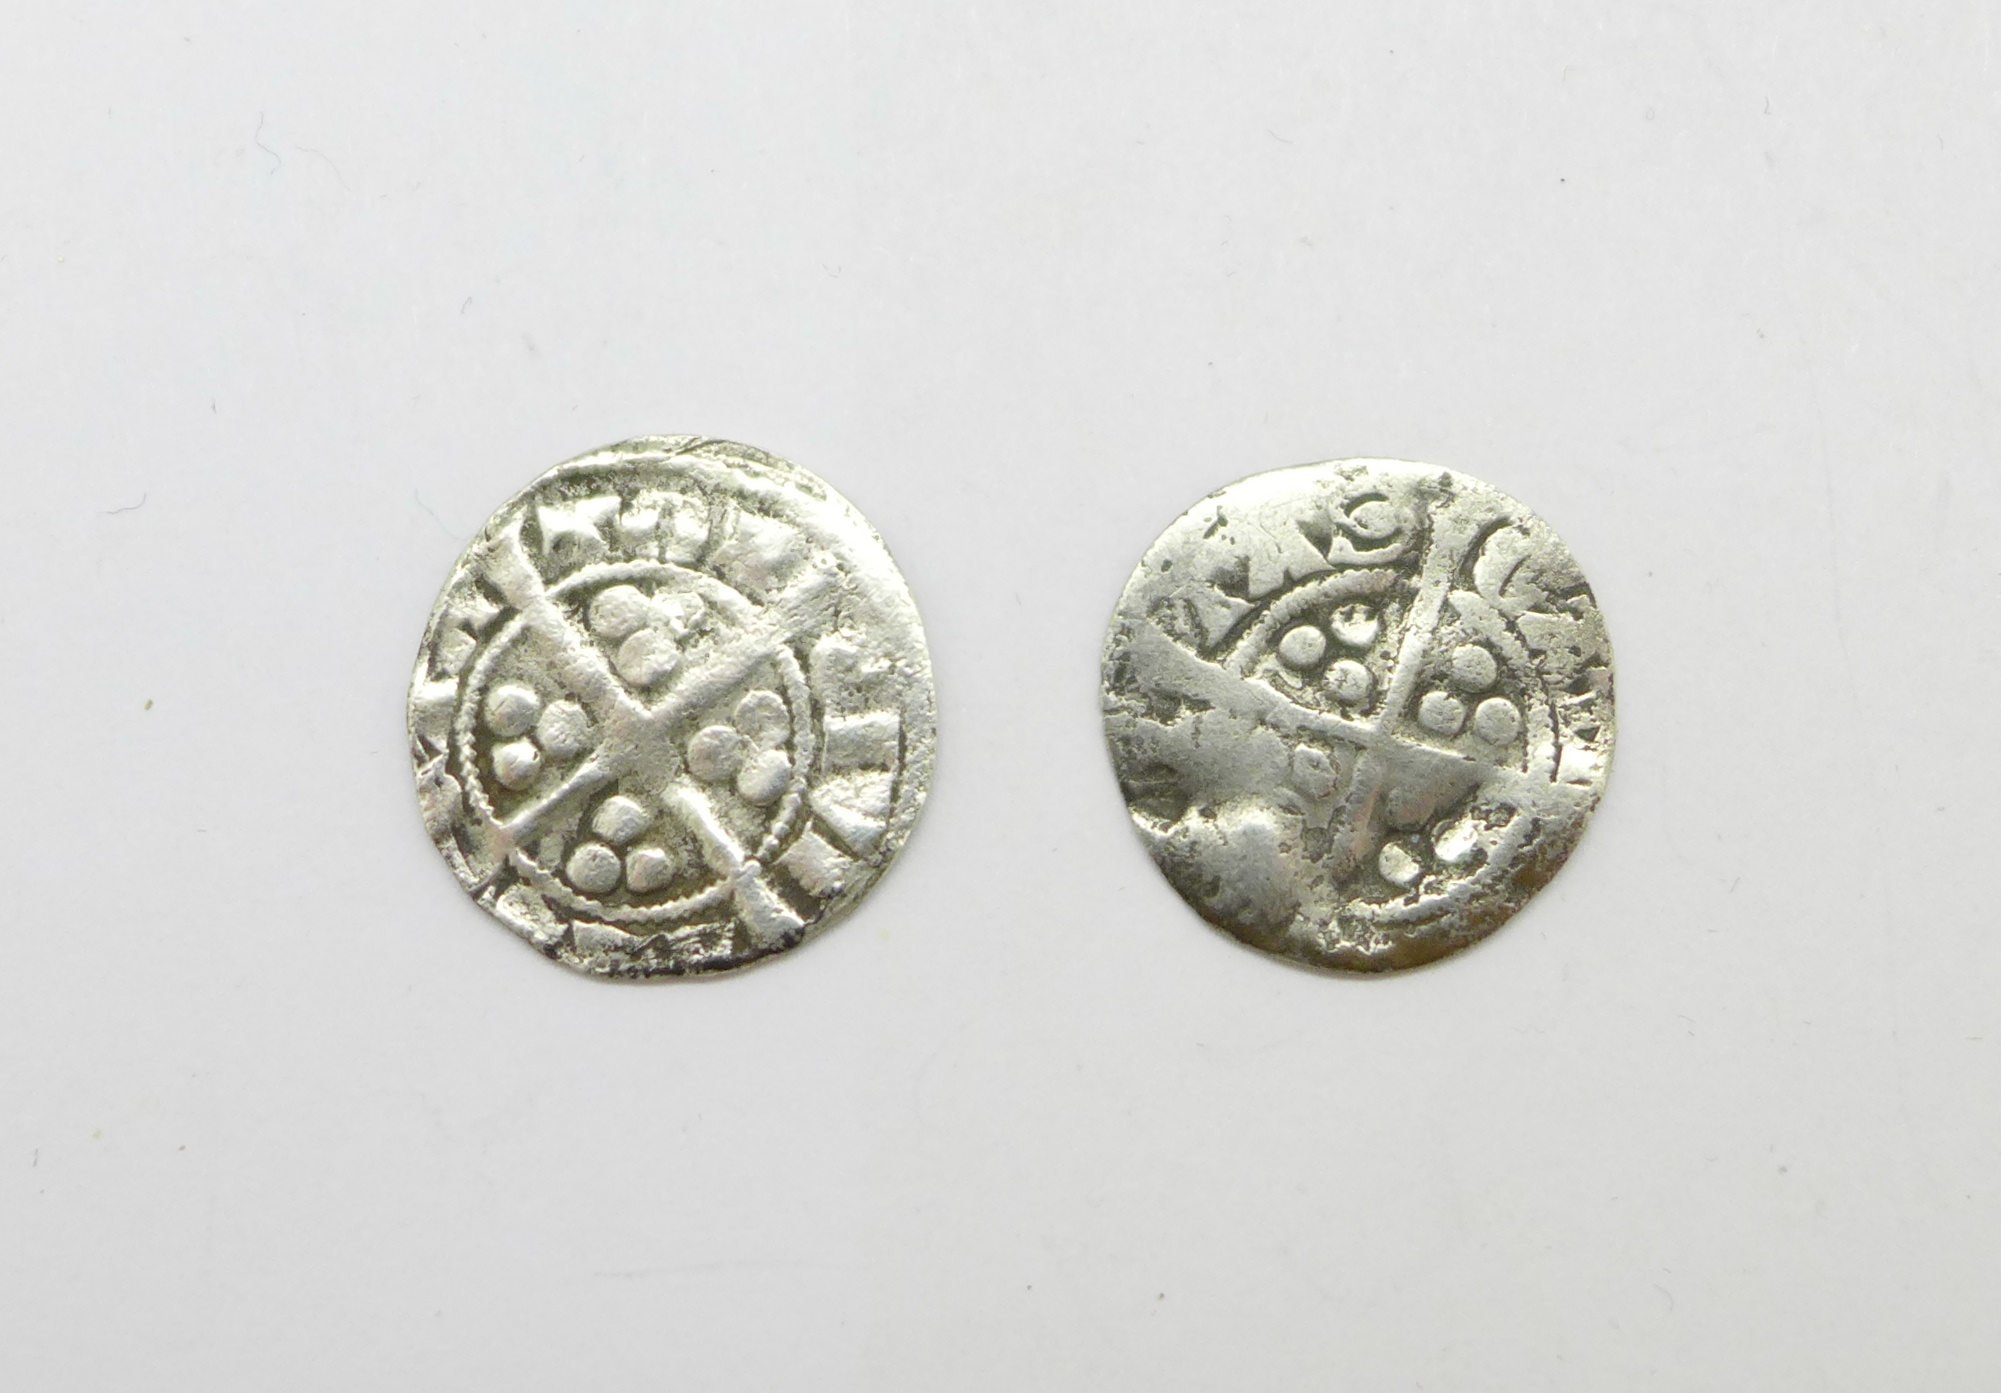 Two Edward I 1272 silver pennies - Image 2 of 2